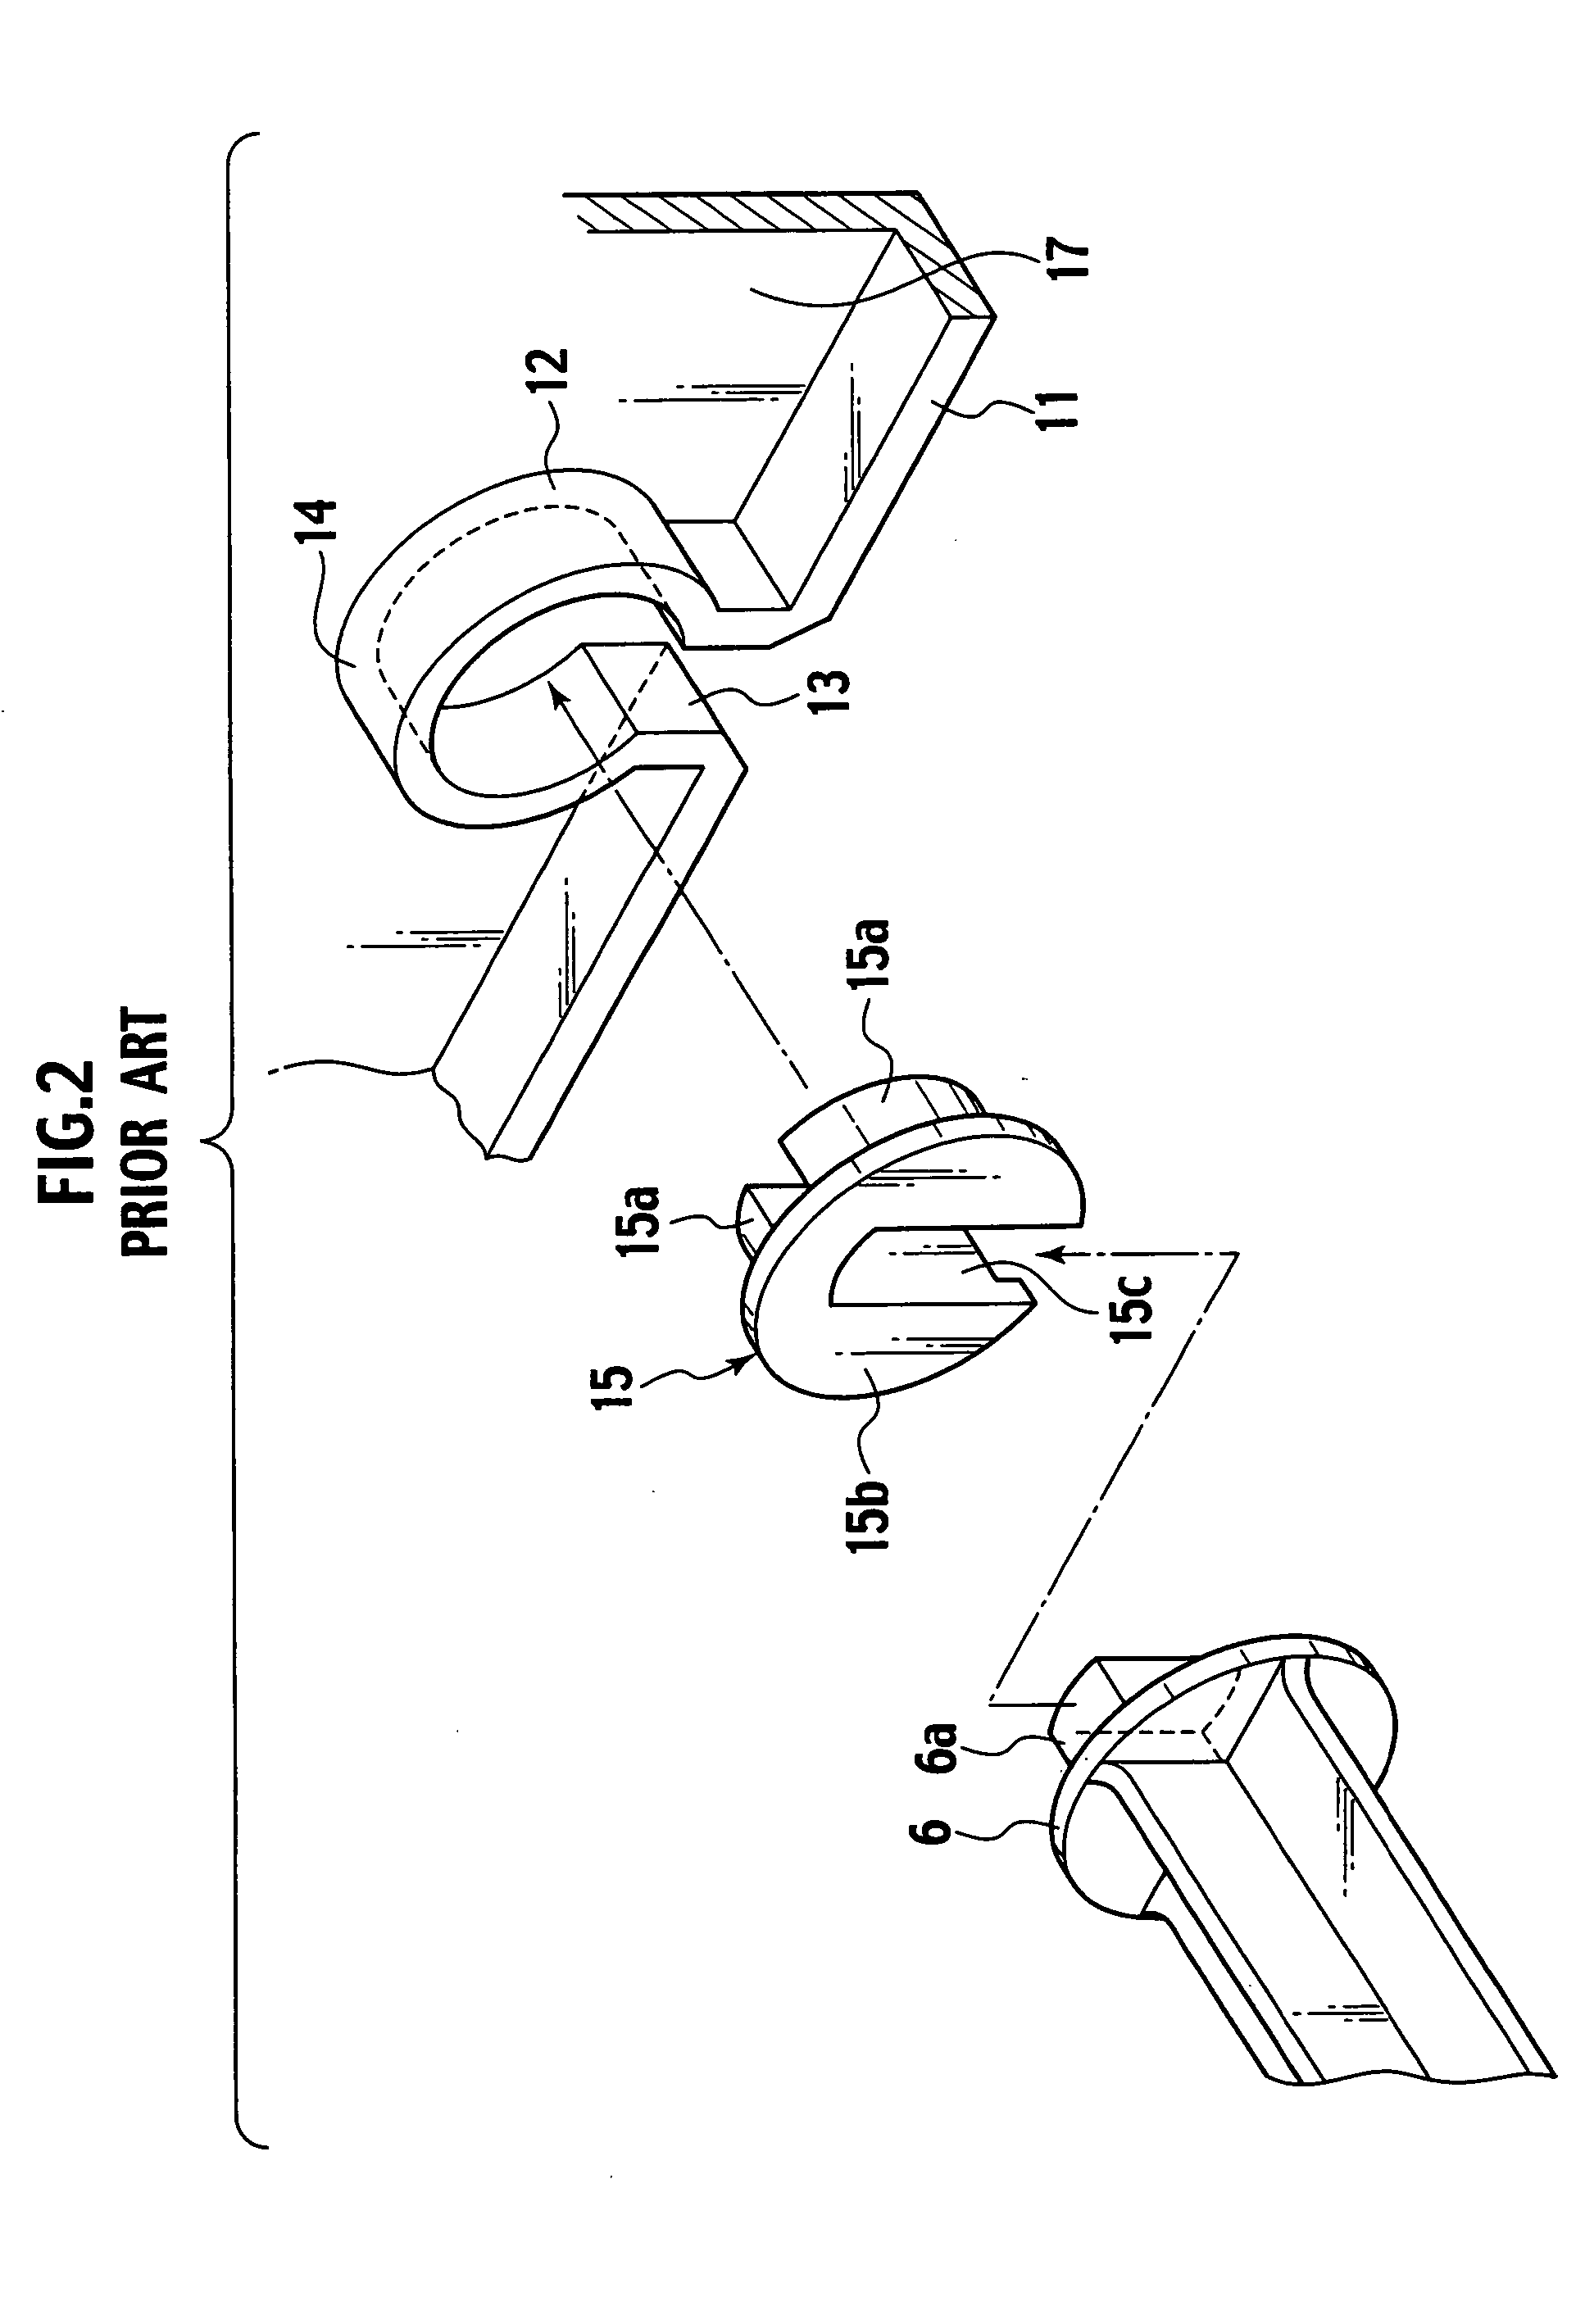 Shift lever device for vehicle